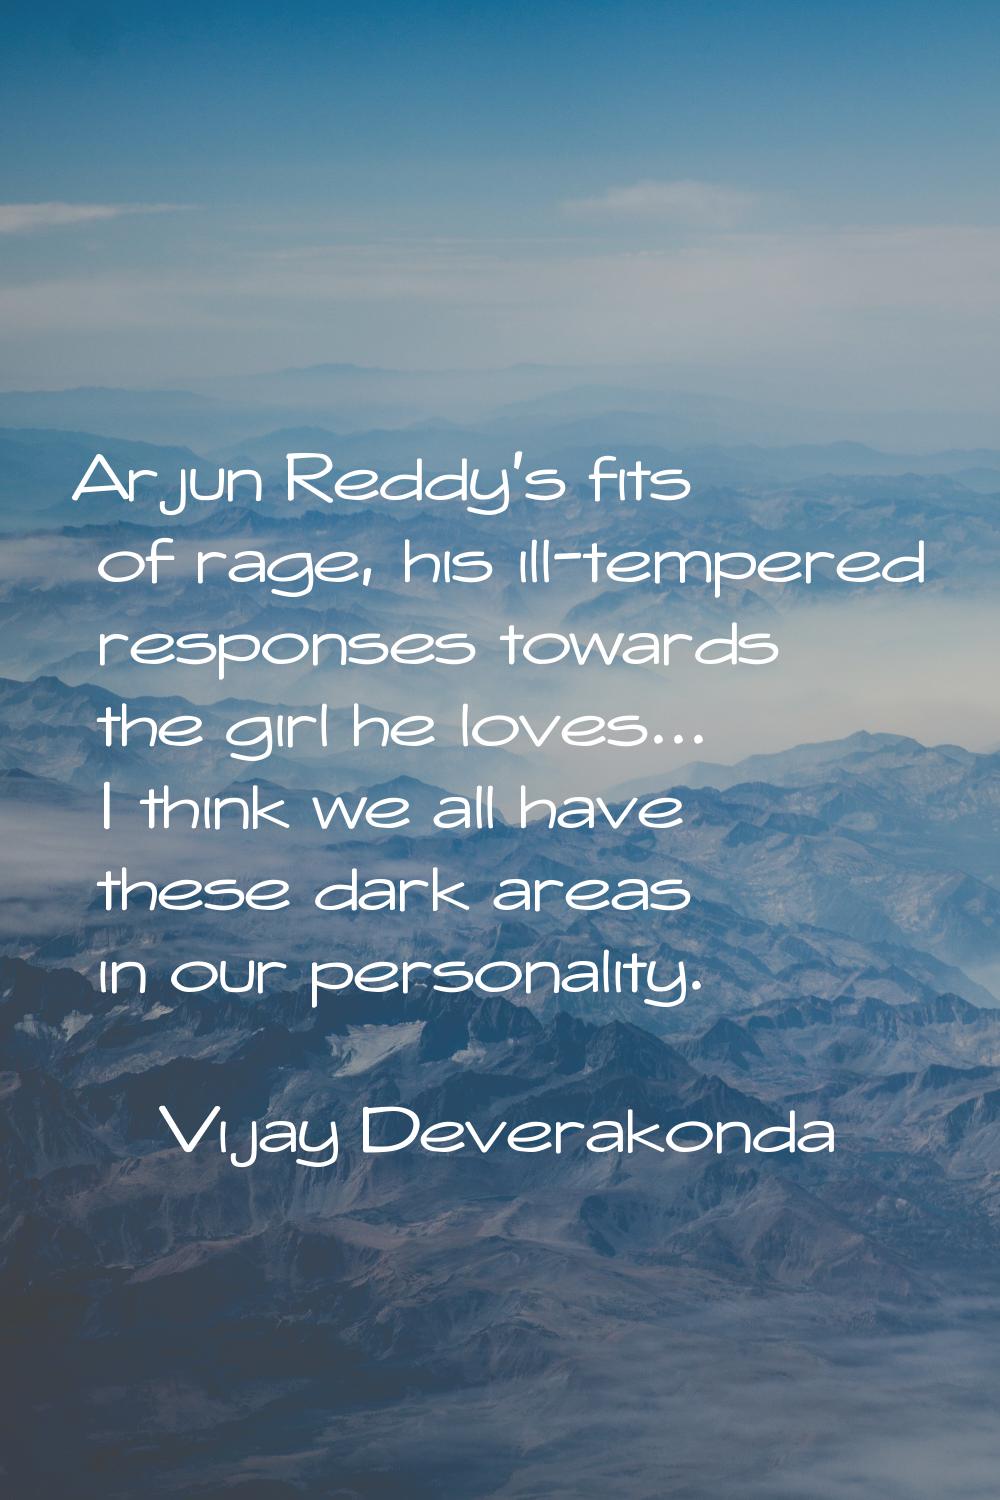 Arjun Reddy's fits of rage, his ill-tempered responses towards the girl he loves... I think we all 